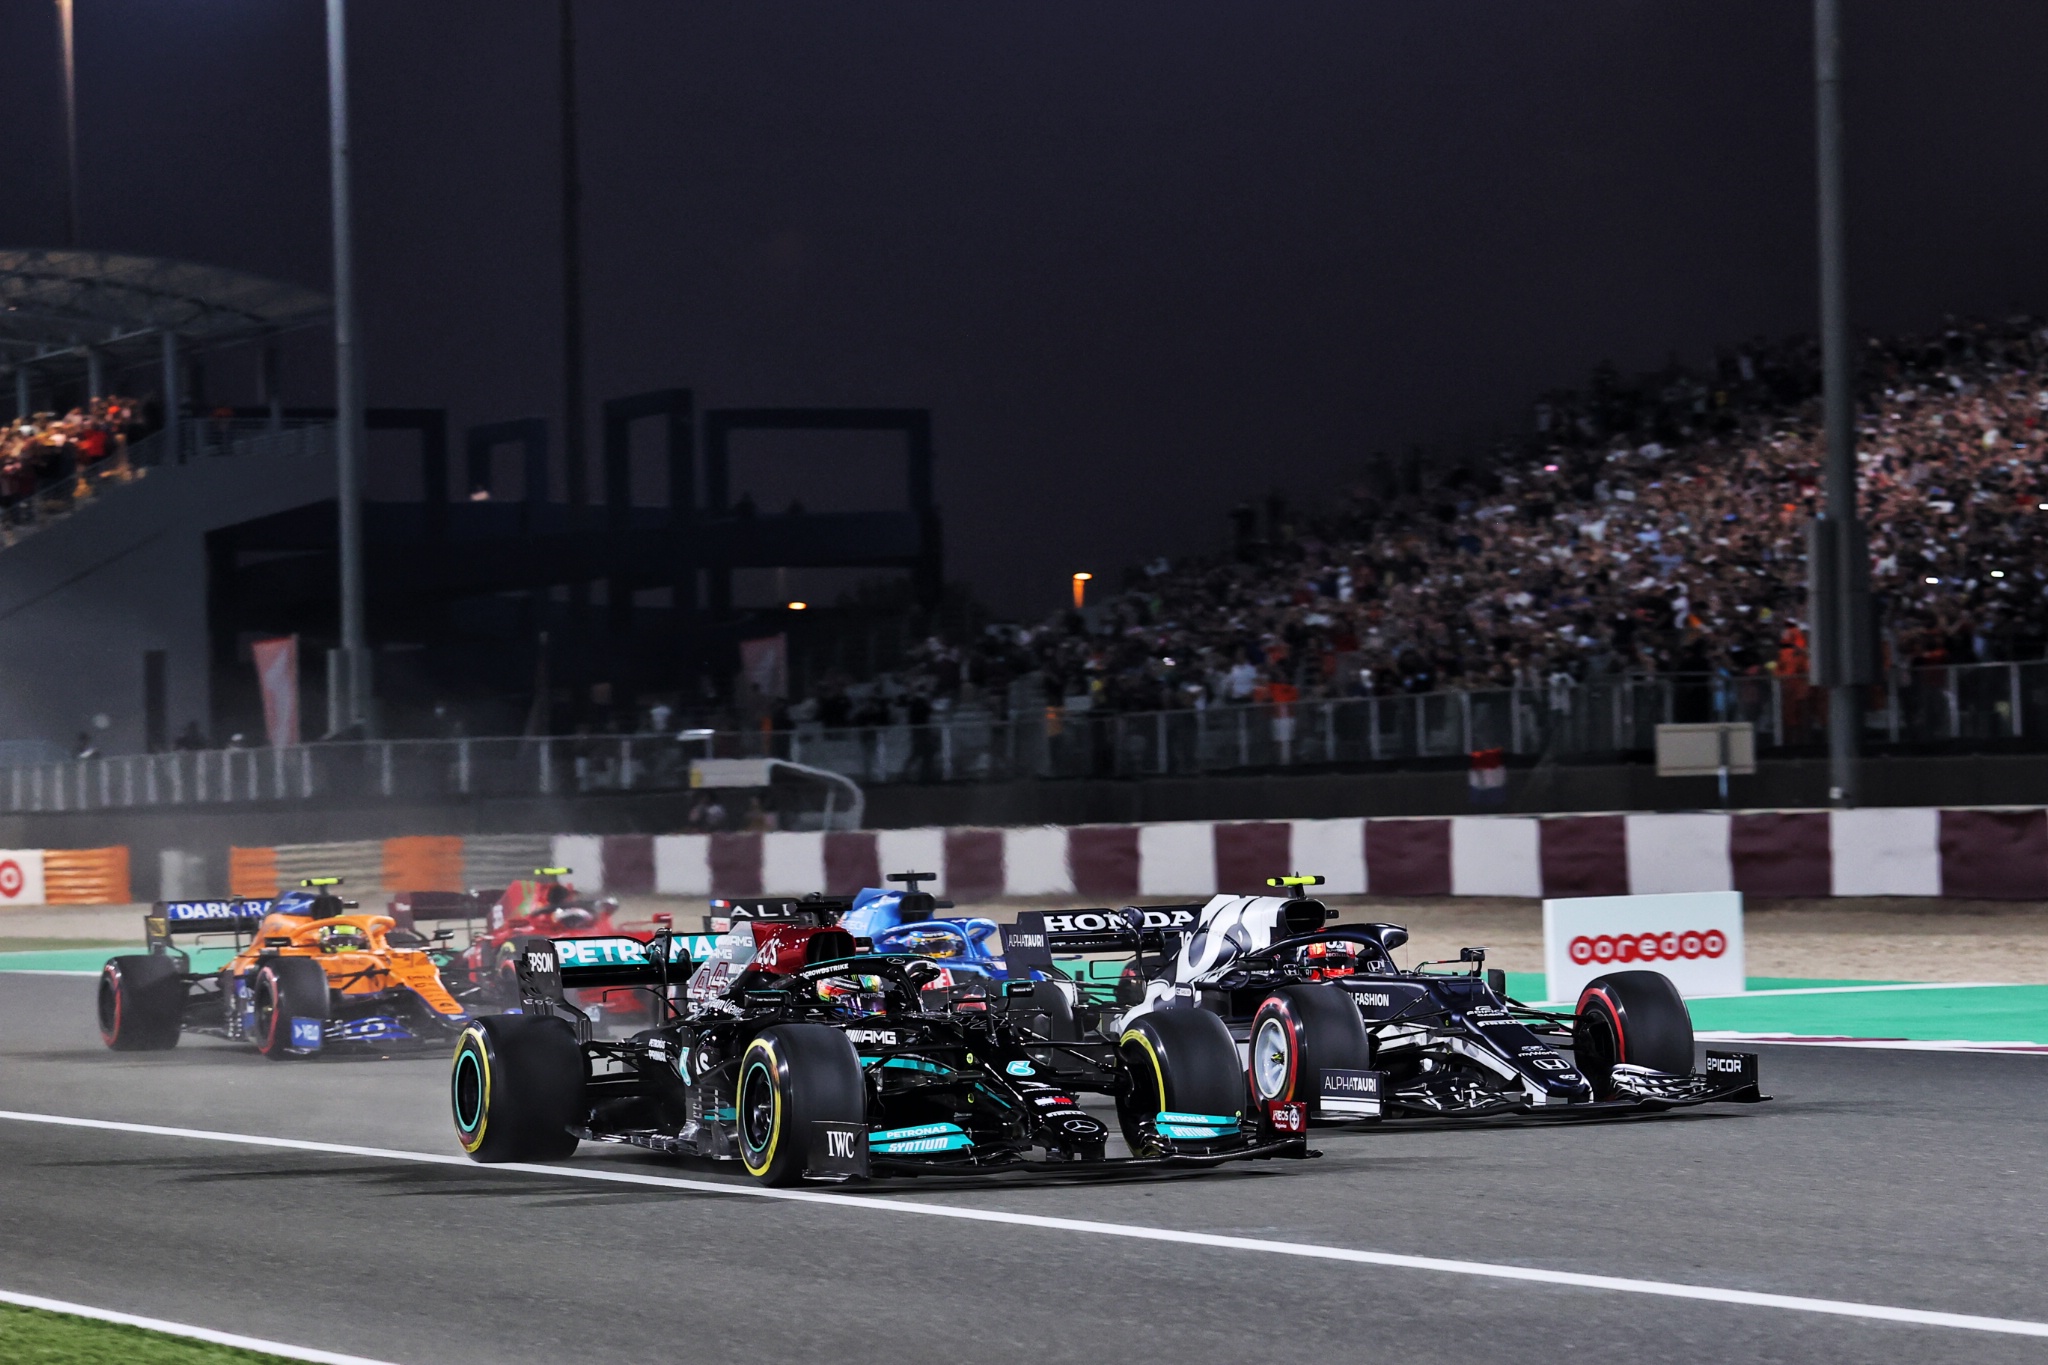 Lewis Hamilton (GBR) Mercedes AMG F1 W12 and Pierre Gasly (FRA) AlphaTauri AT02 battle for the lead at the start of the race.